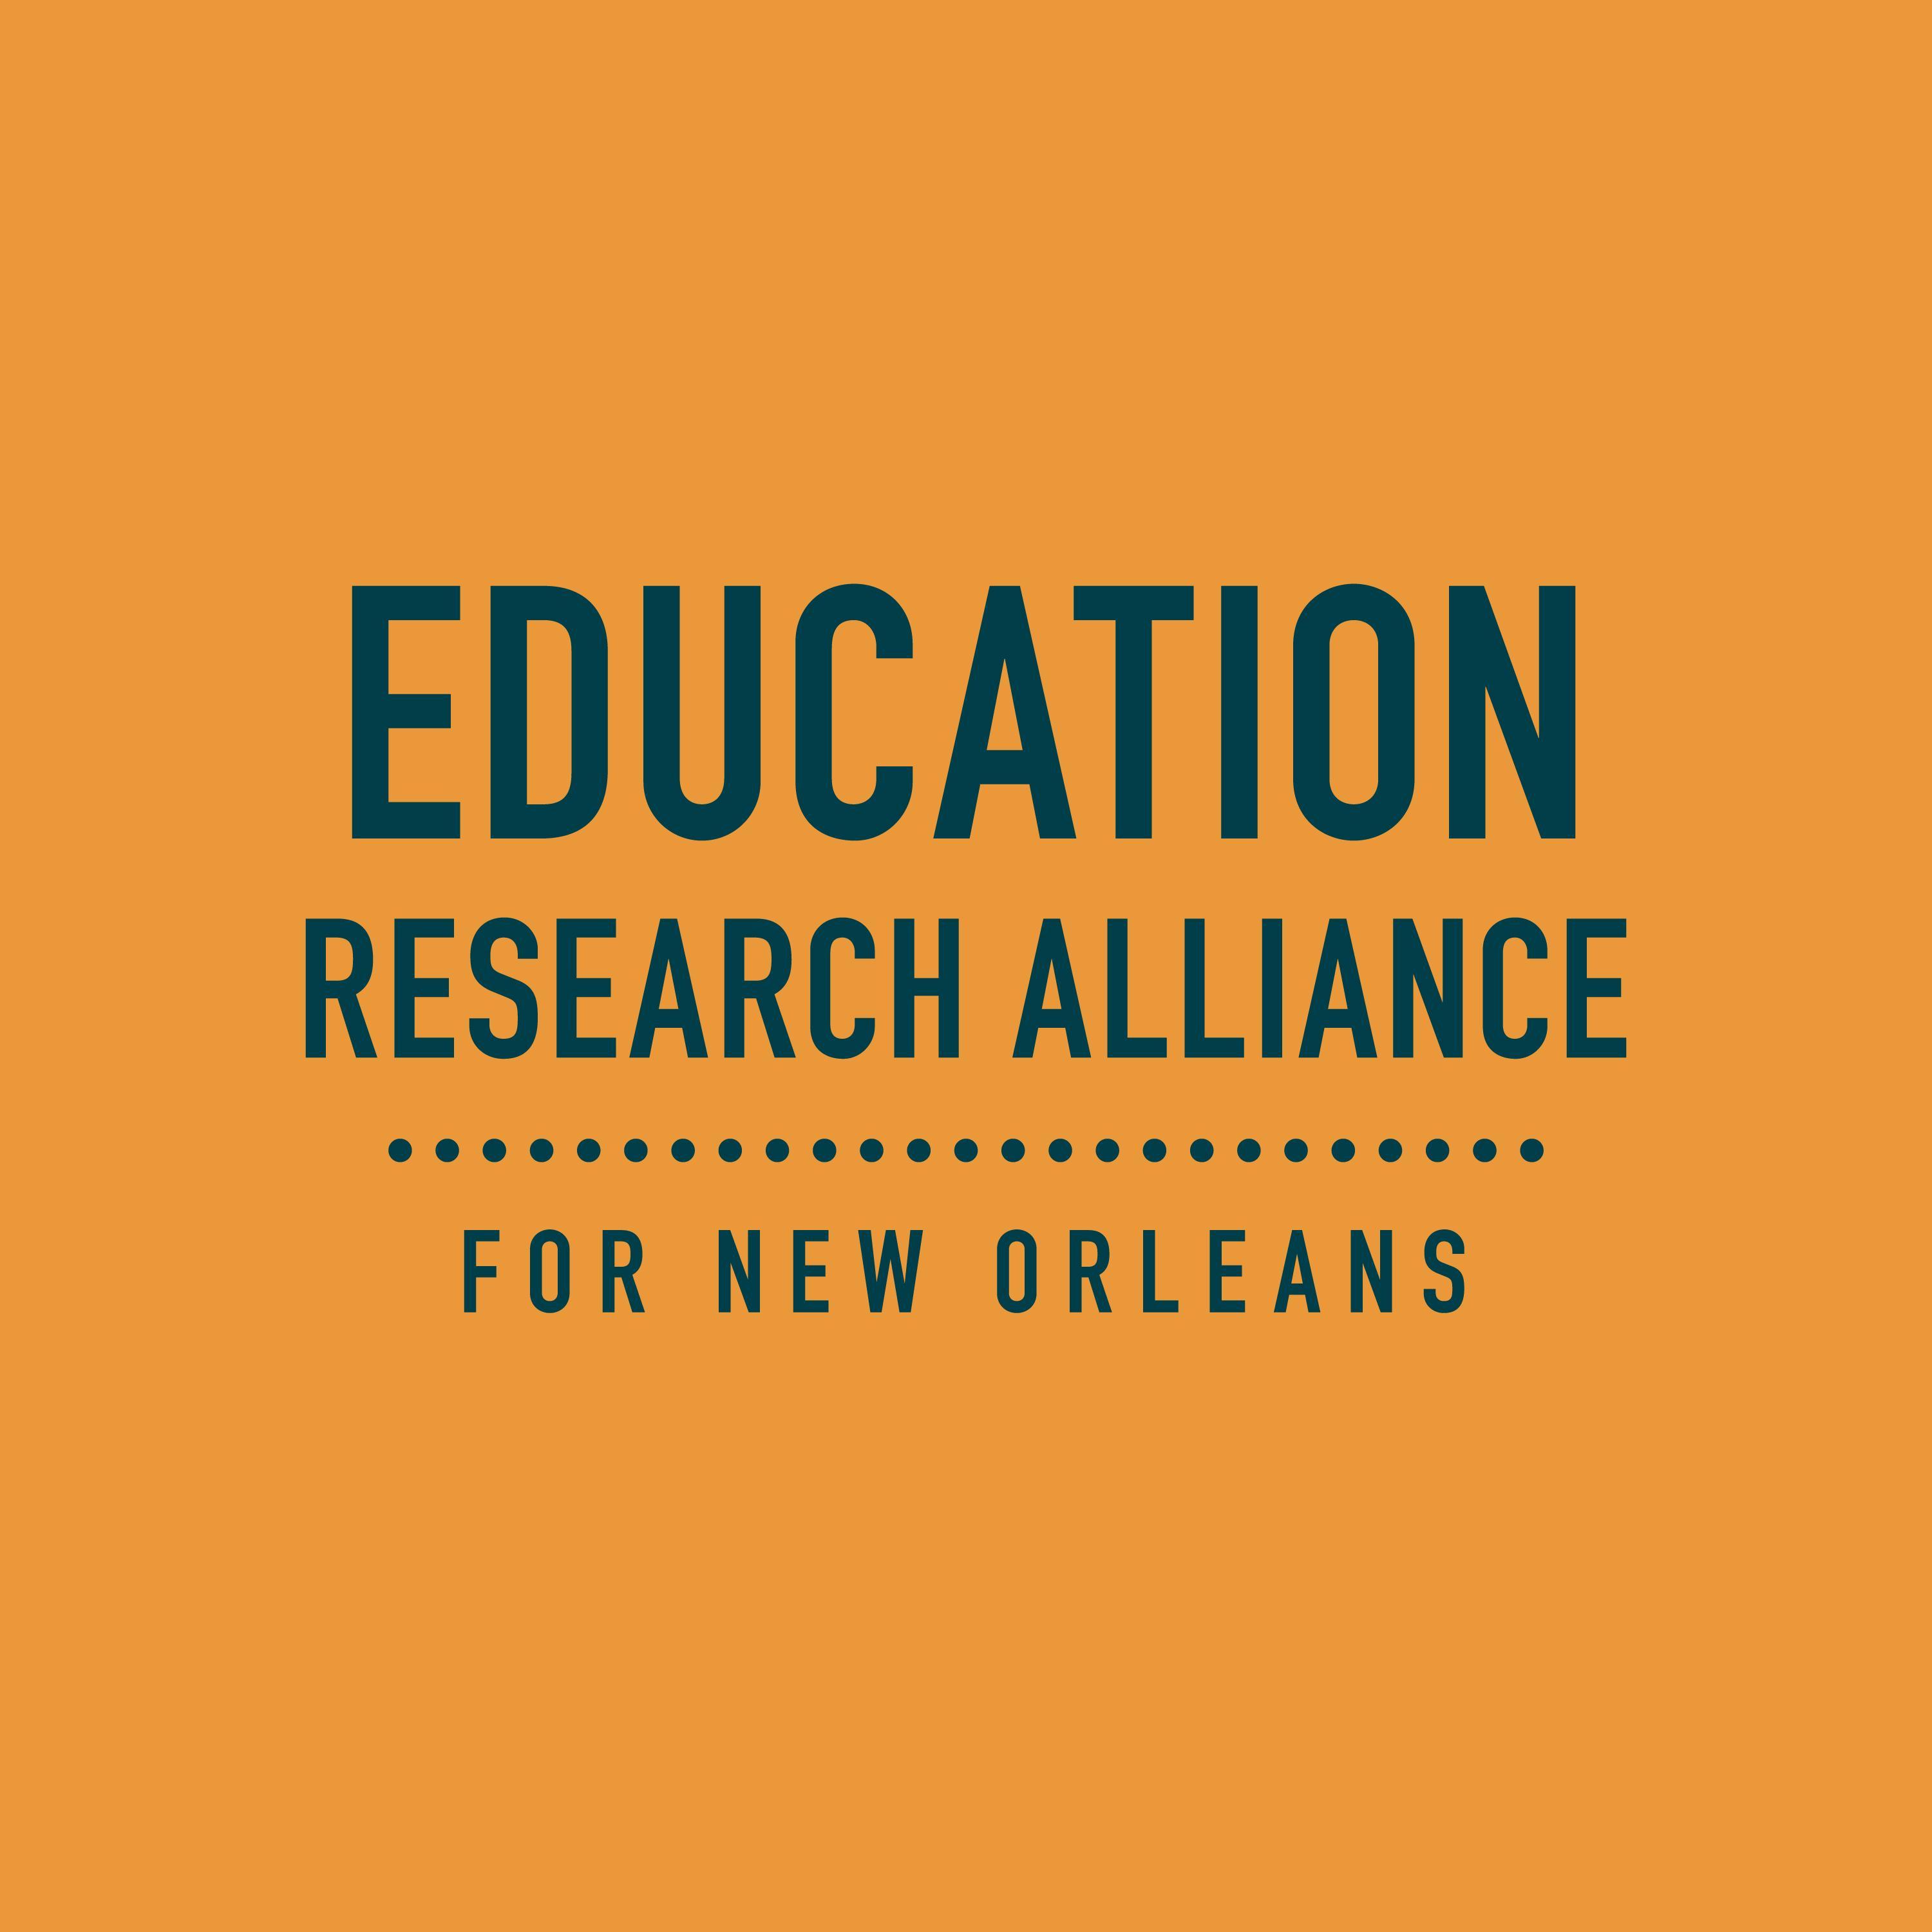 Objective, Rigorous, and Useful Research to Understand the Post-Katrina School Reforms in New Orleans